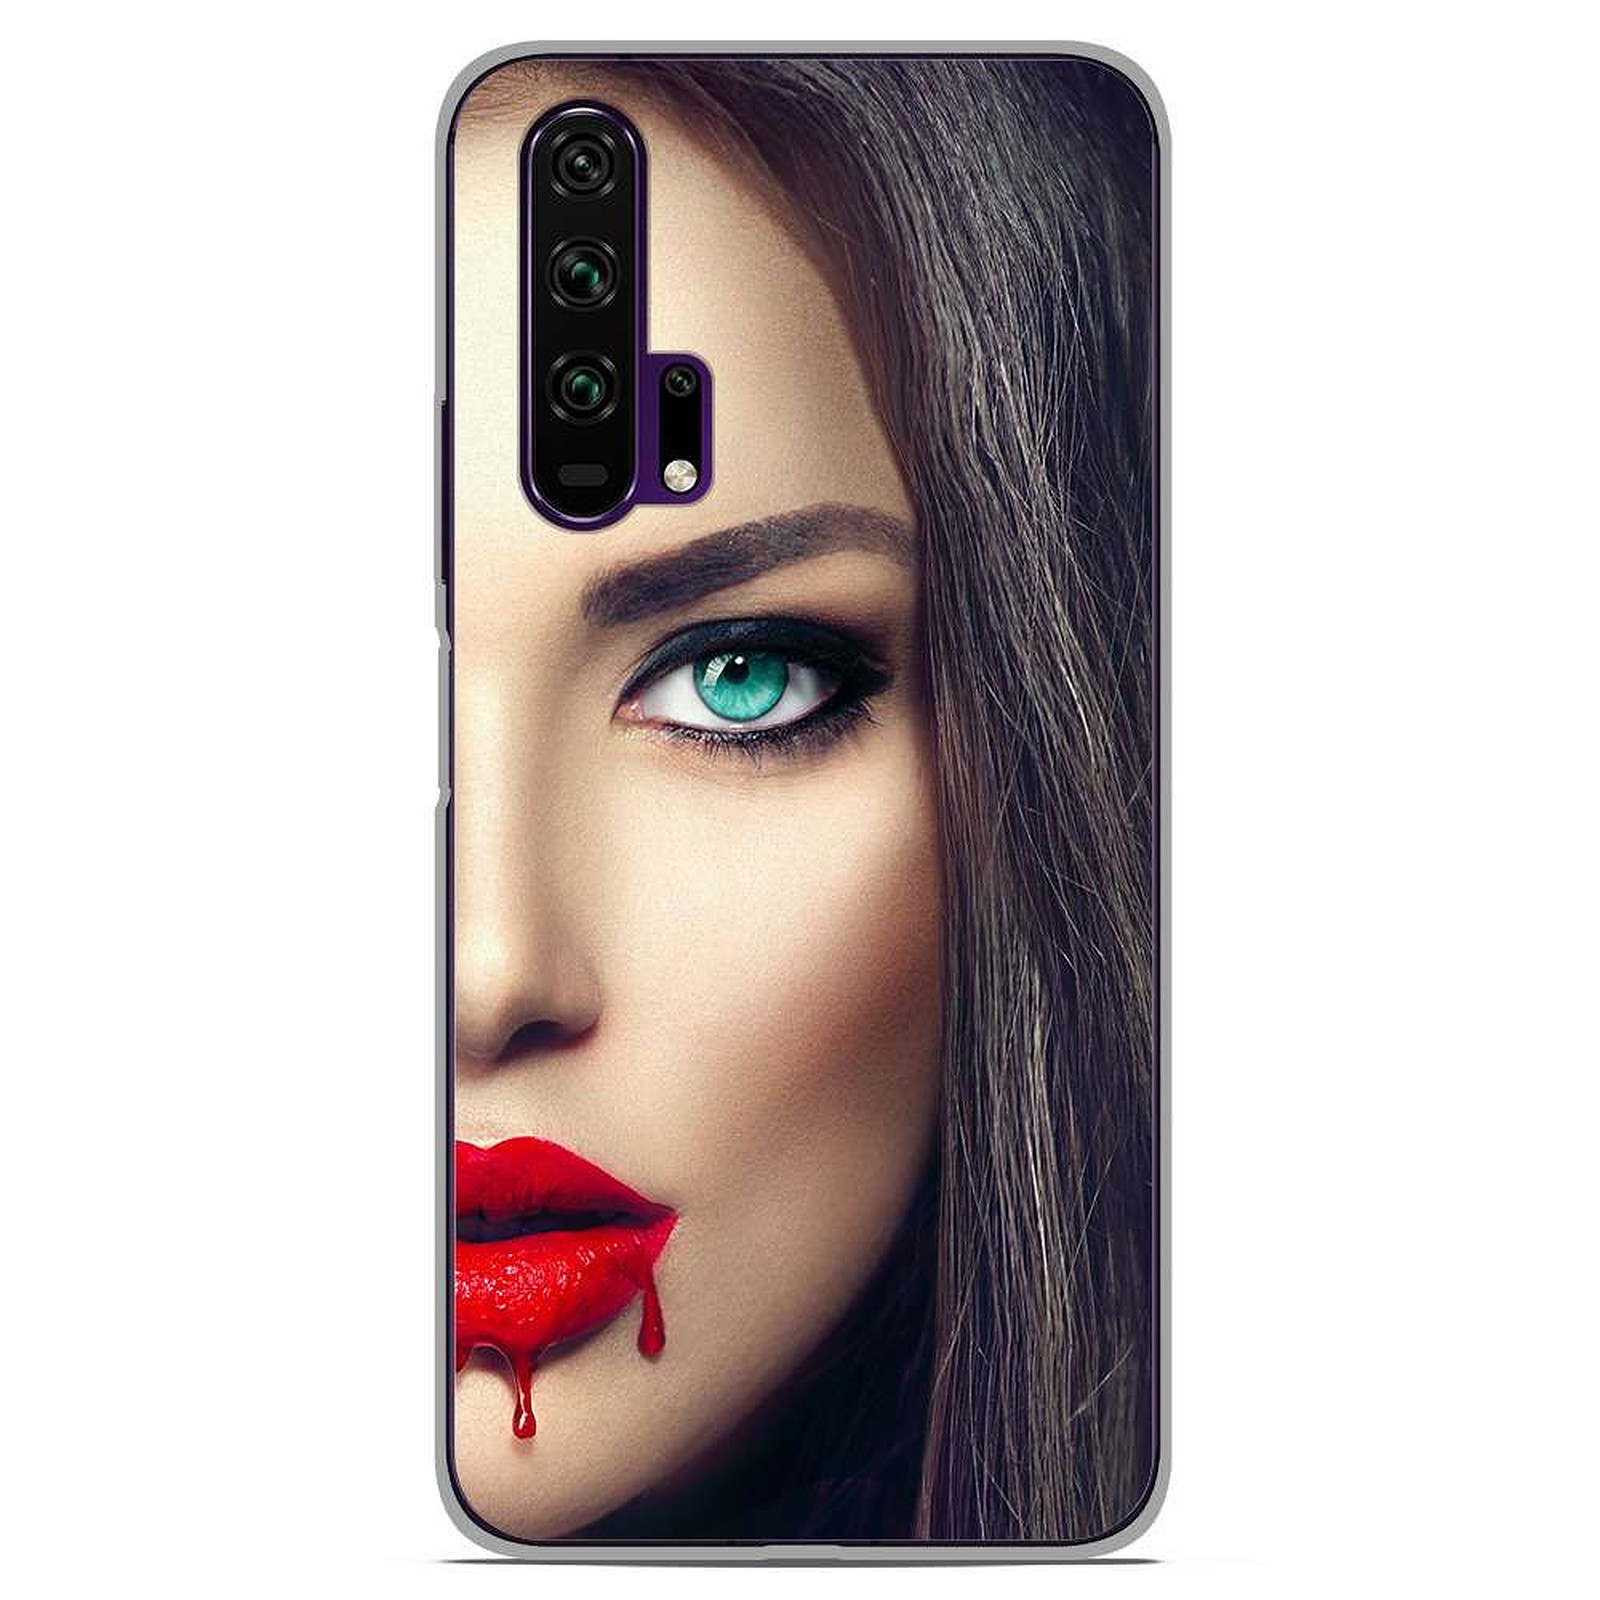 1001 Coques Coque silicone gel Huawei Honor 20 Pro motif Lèvres Sang - Coque telephone 1001Coques